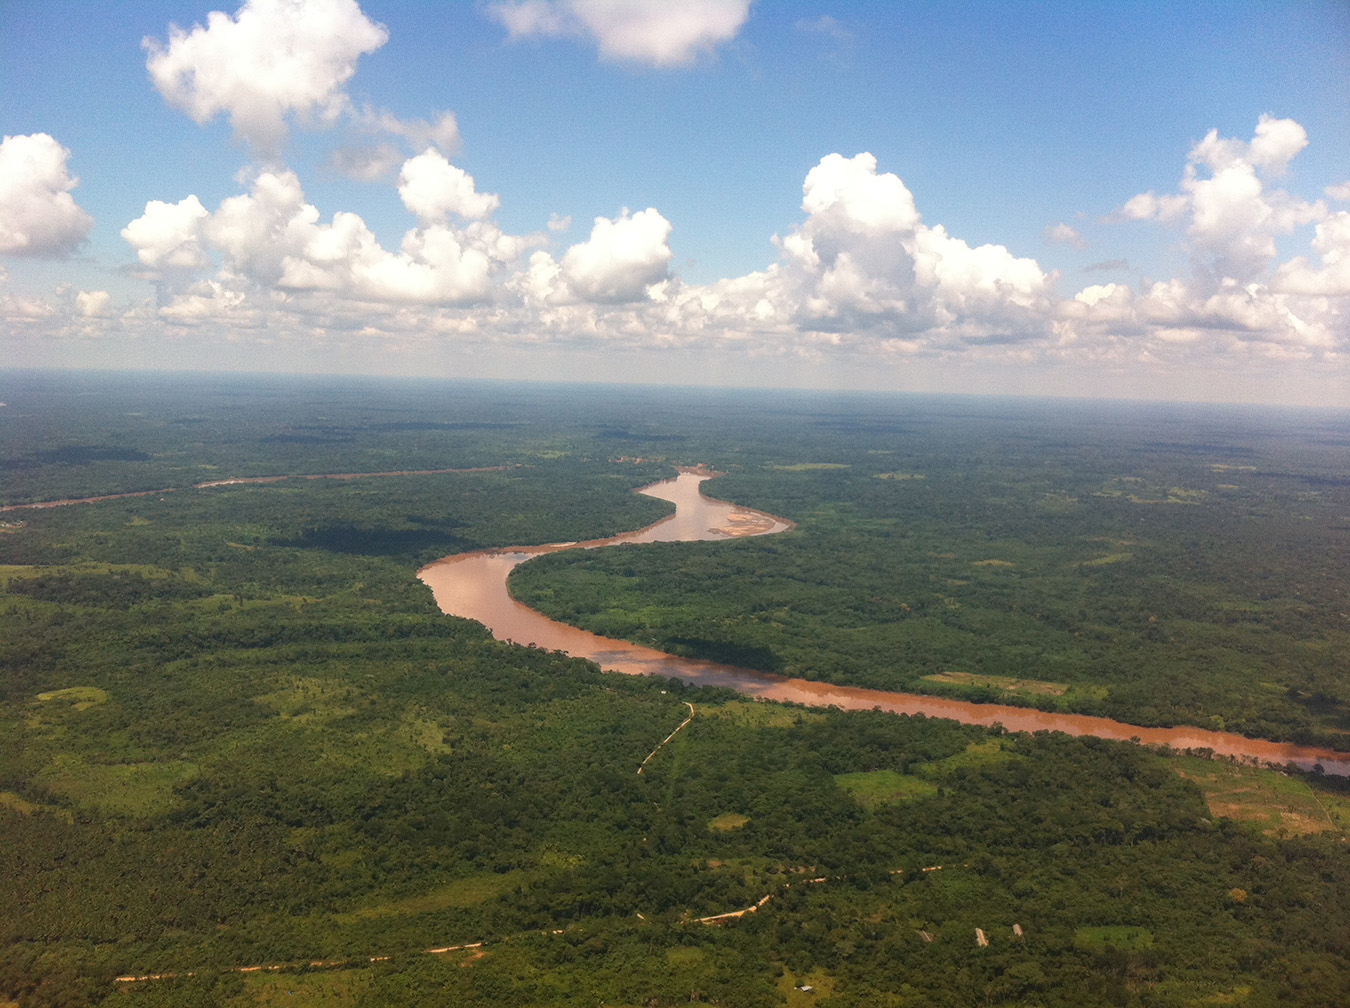 The Madre de Dios River. Photo by Ruth Goldstein.